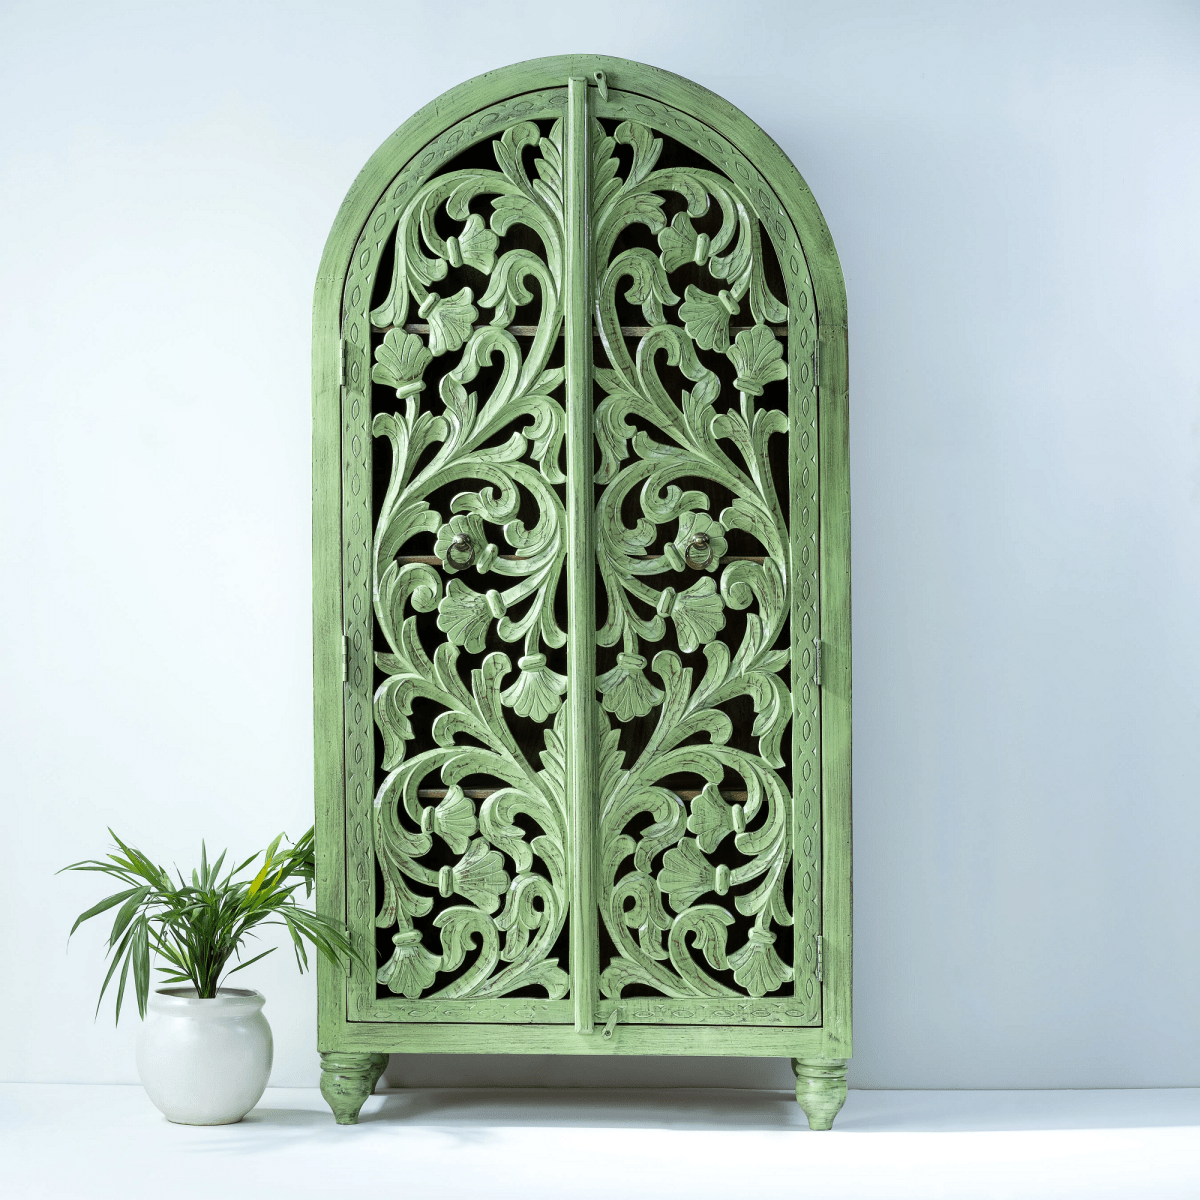 Handmade Hand Carved Solid Wooden Tall Cupboard in Green Color Armoire - Bone Inlay Furnitures